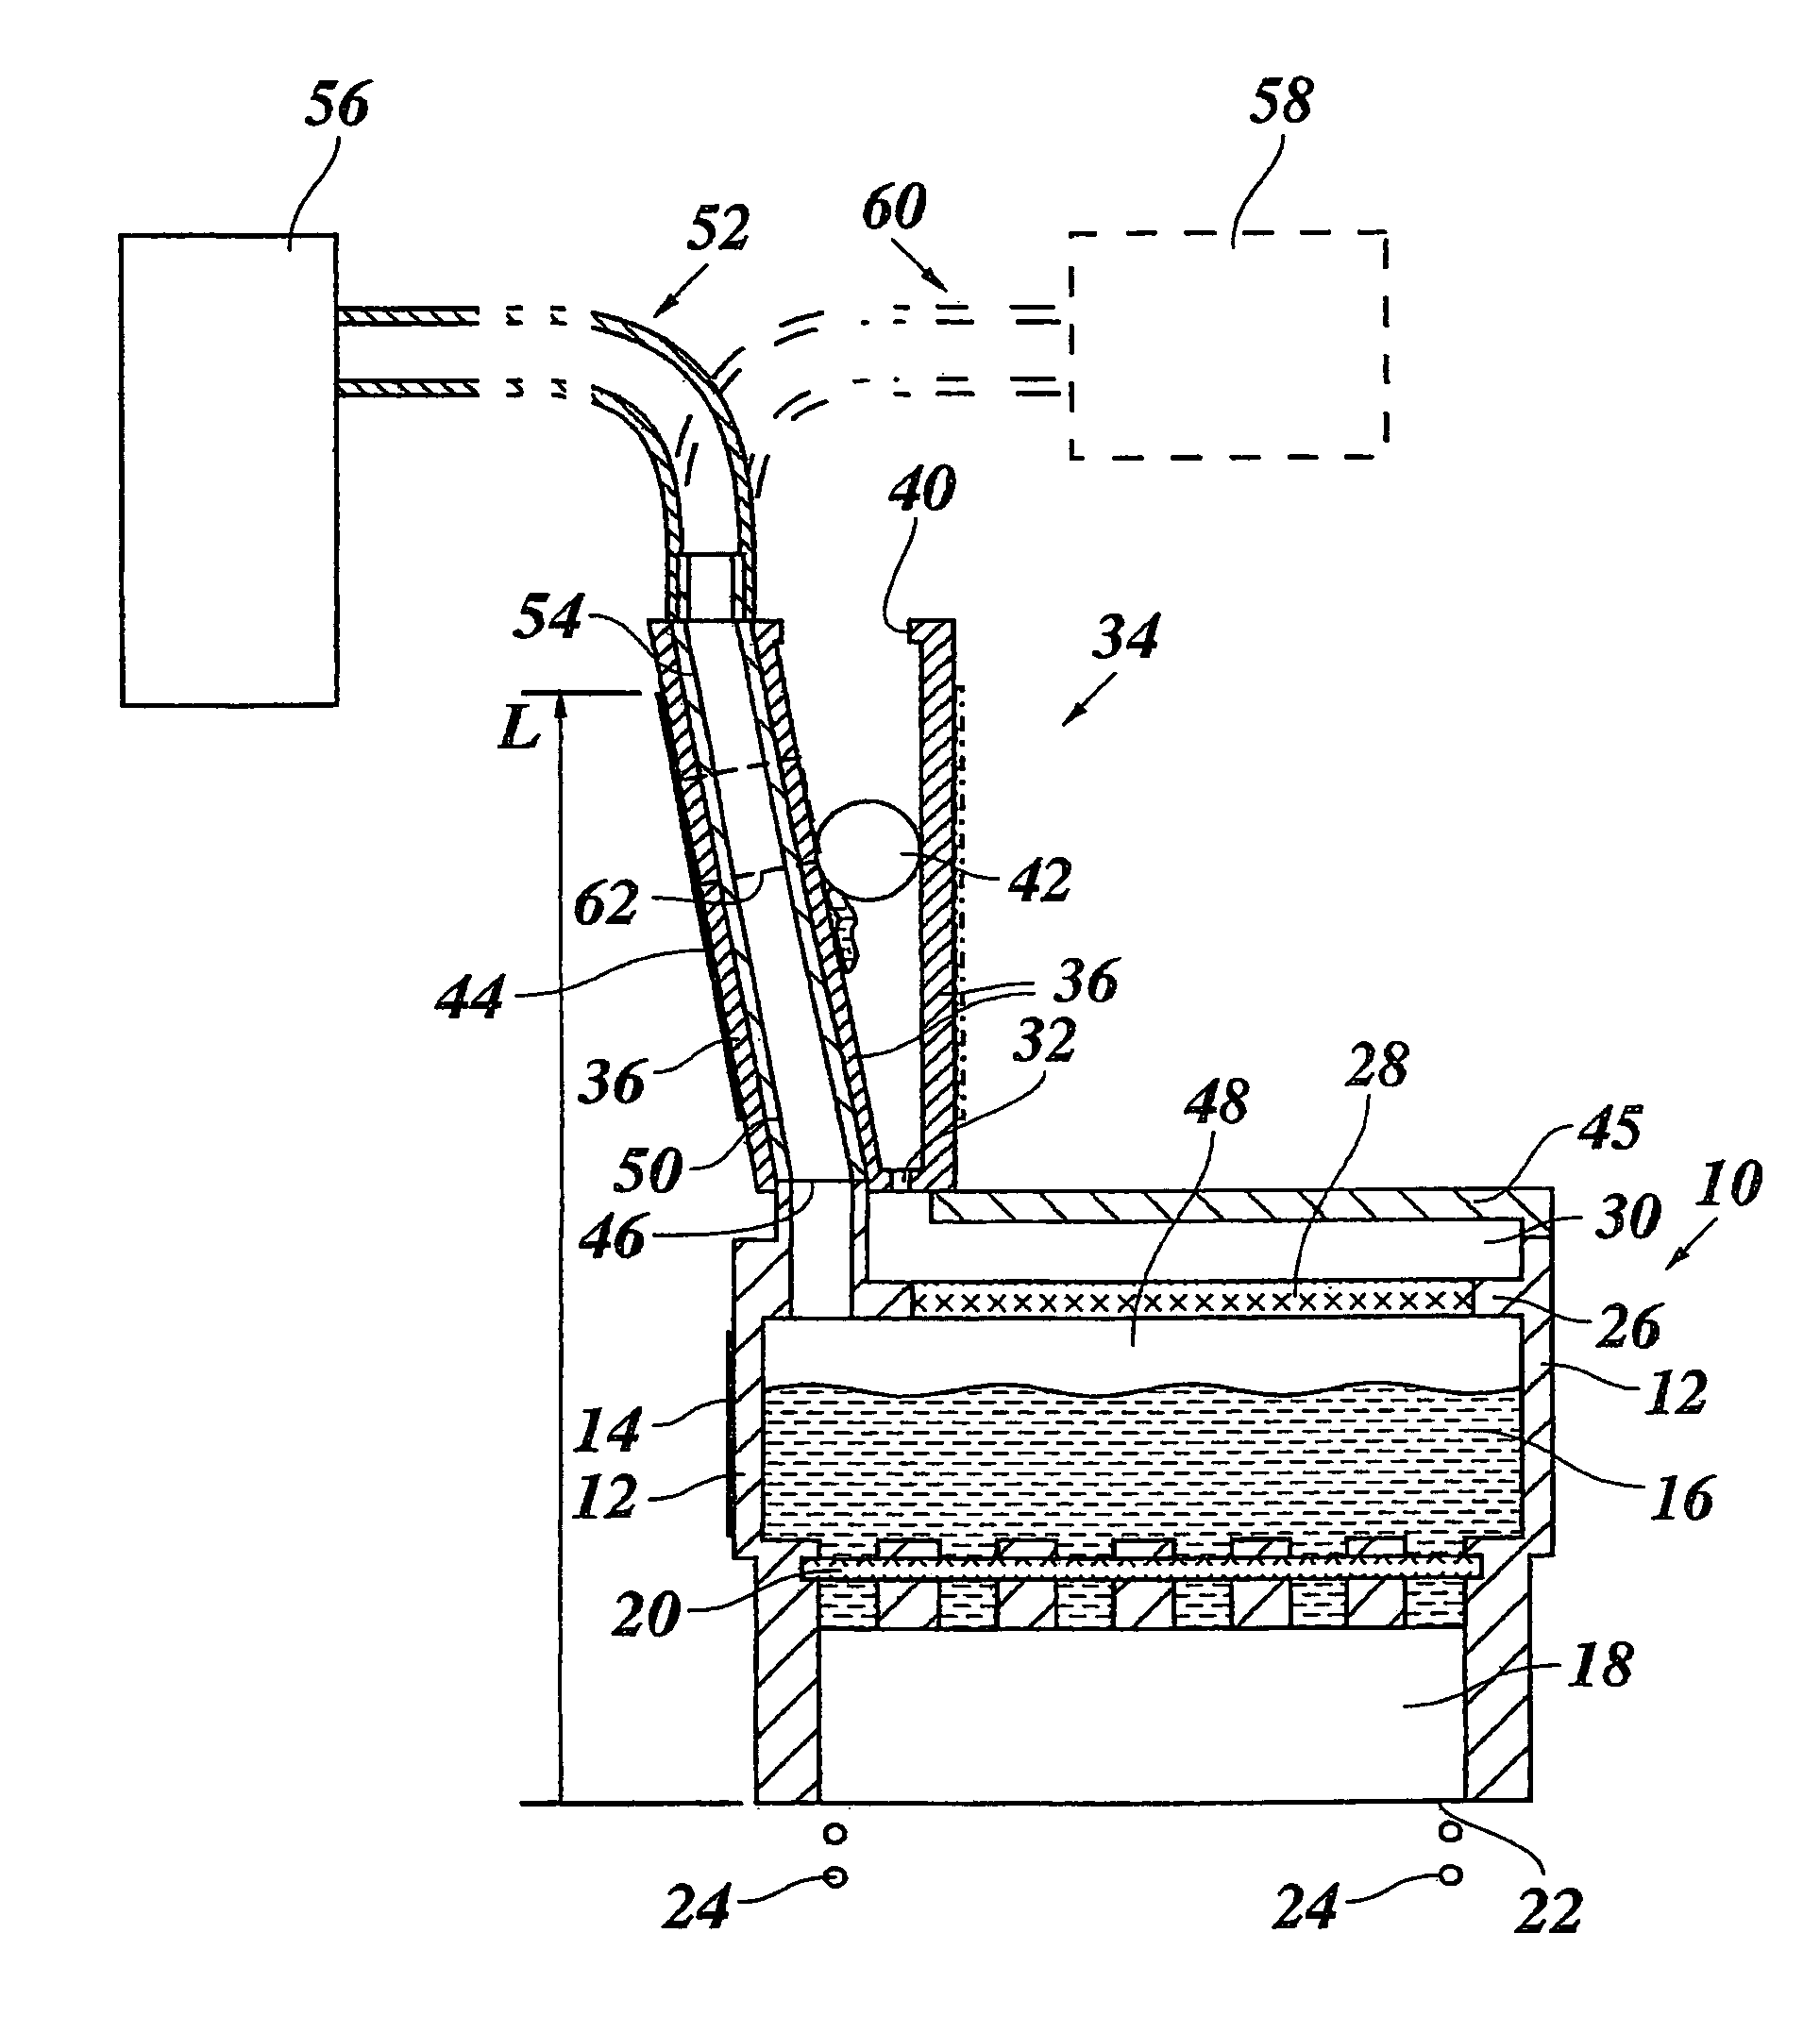 Ink jet device with a ventilation conduit